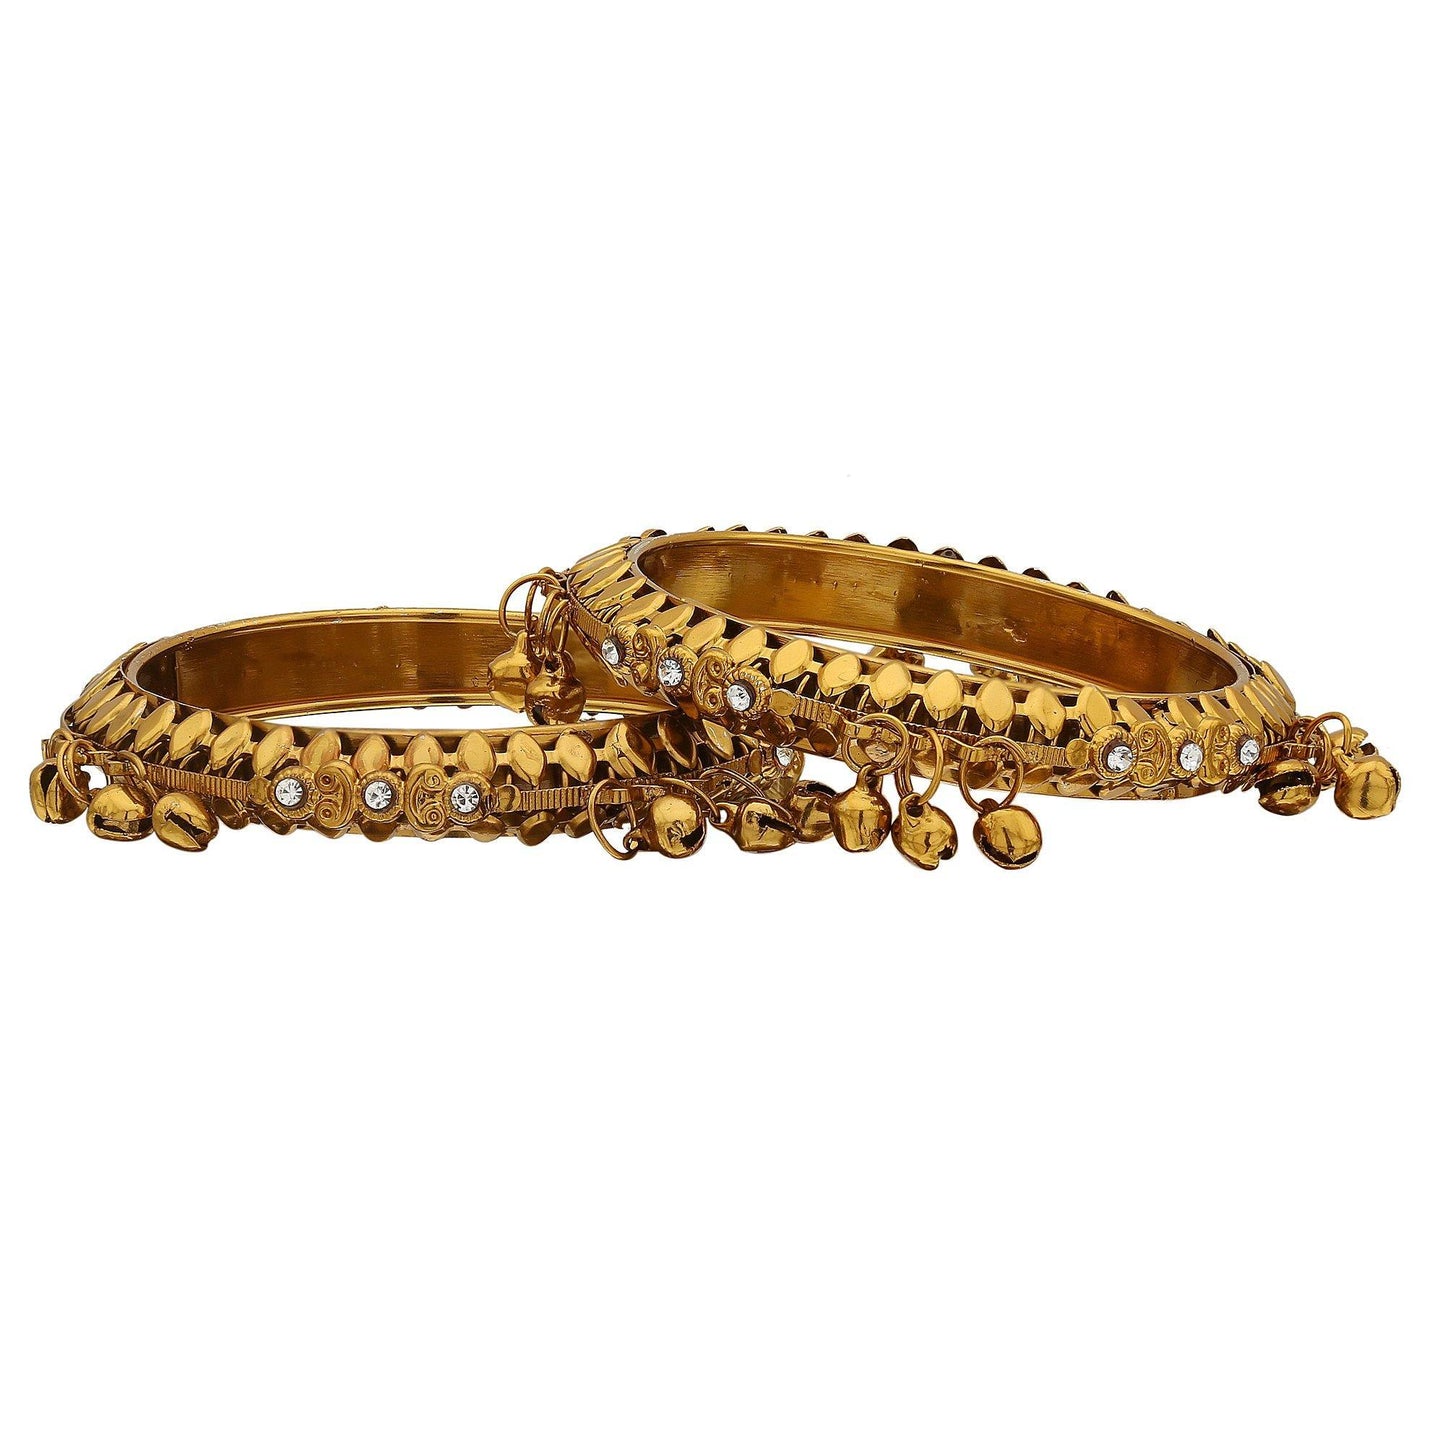 sukriti indian ethnic gold tone ghungroo gold bangles bollywood jewelry for women & girls - set of 2